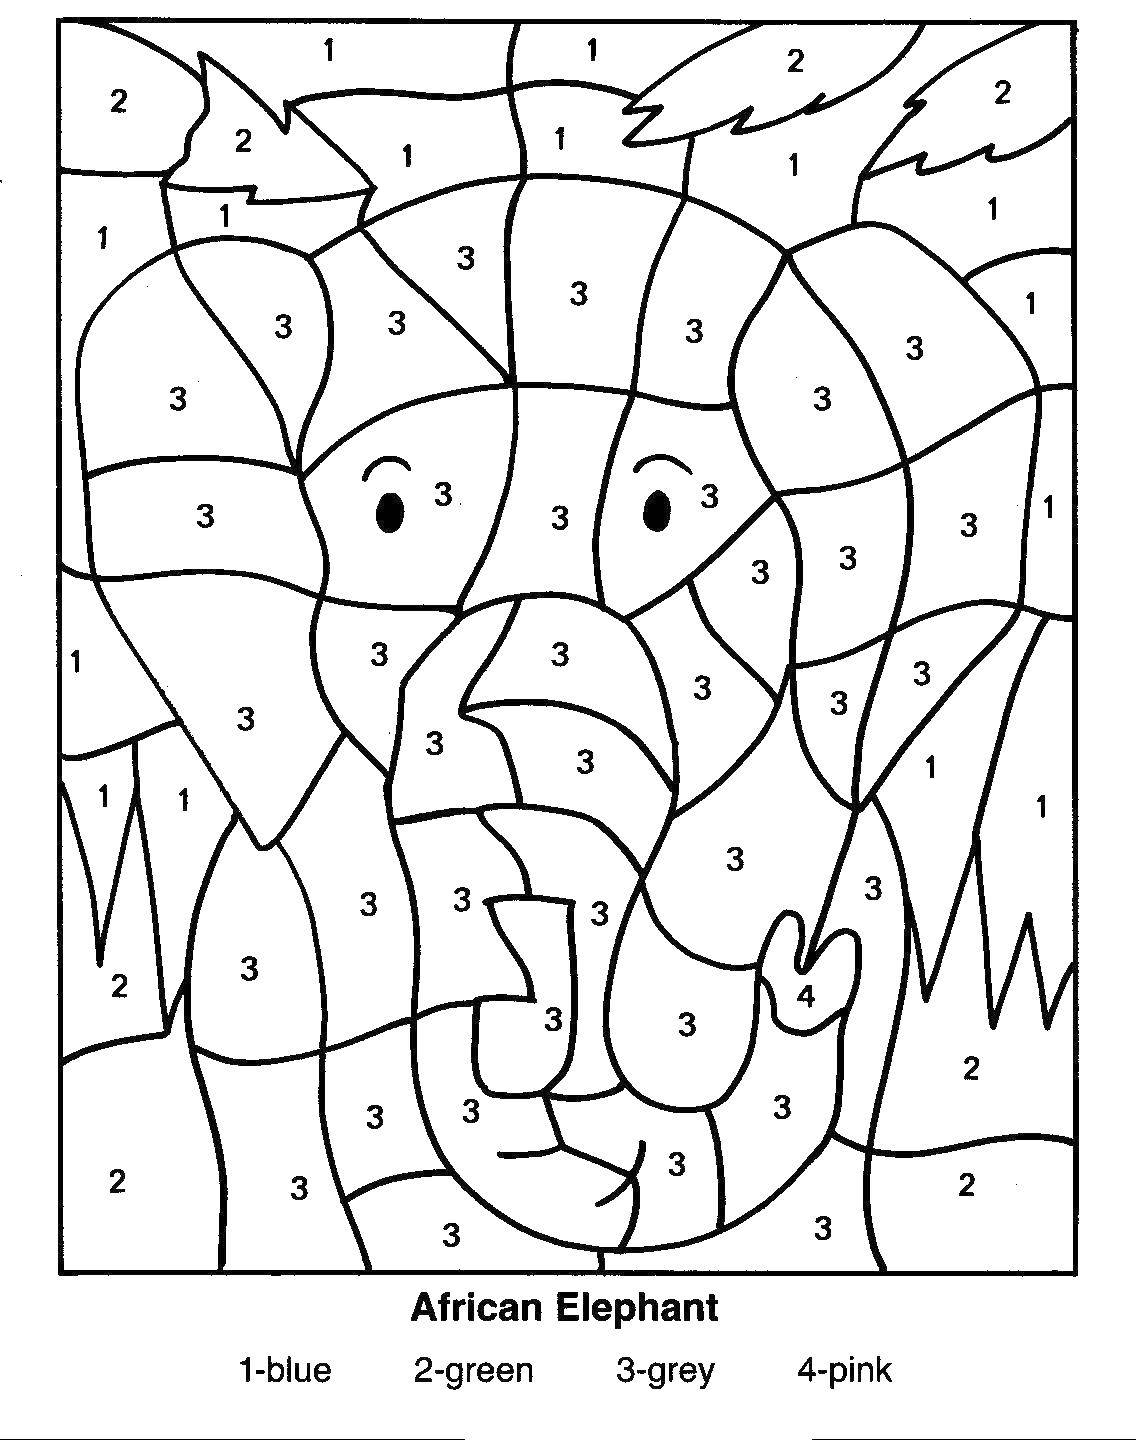 Coloring By numbers elephant. Category That number. Tags:  The elephant In the room.